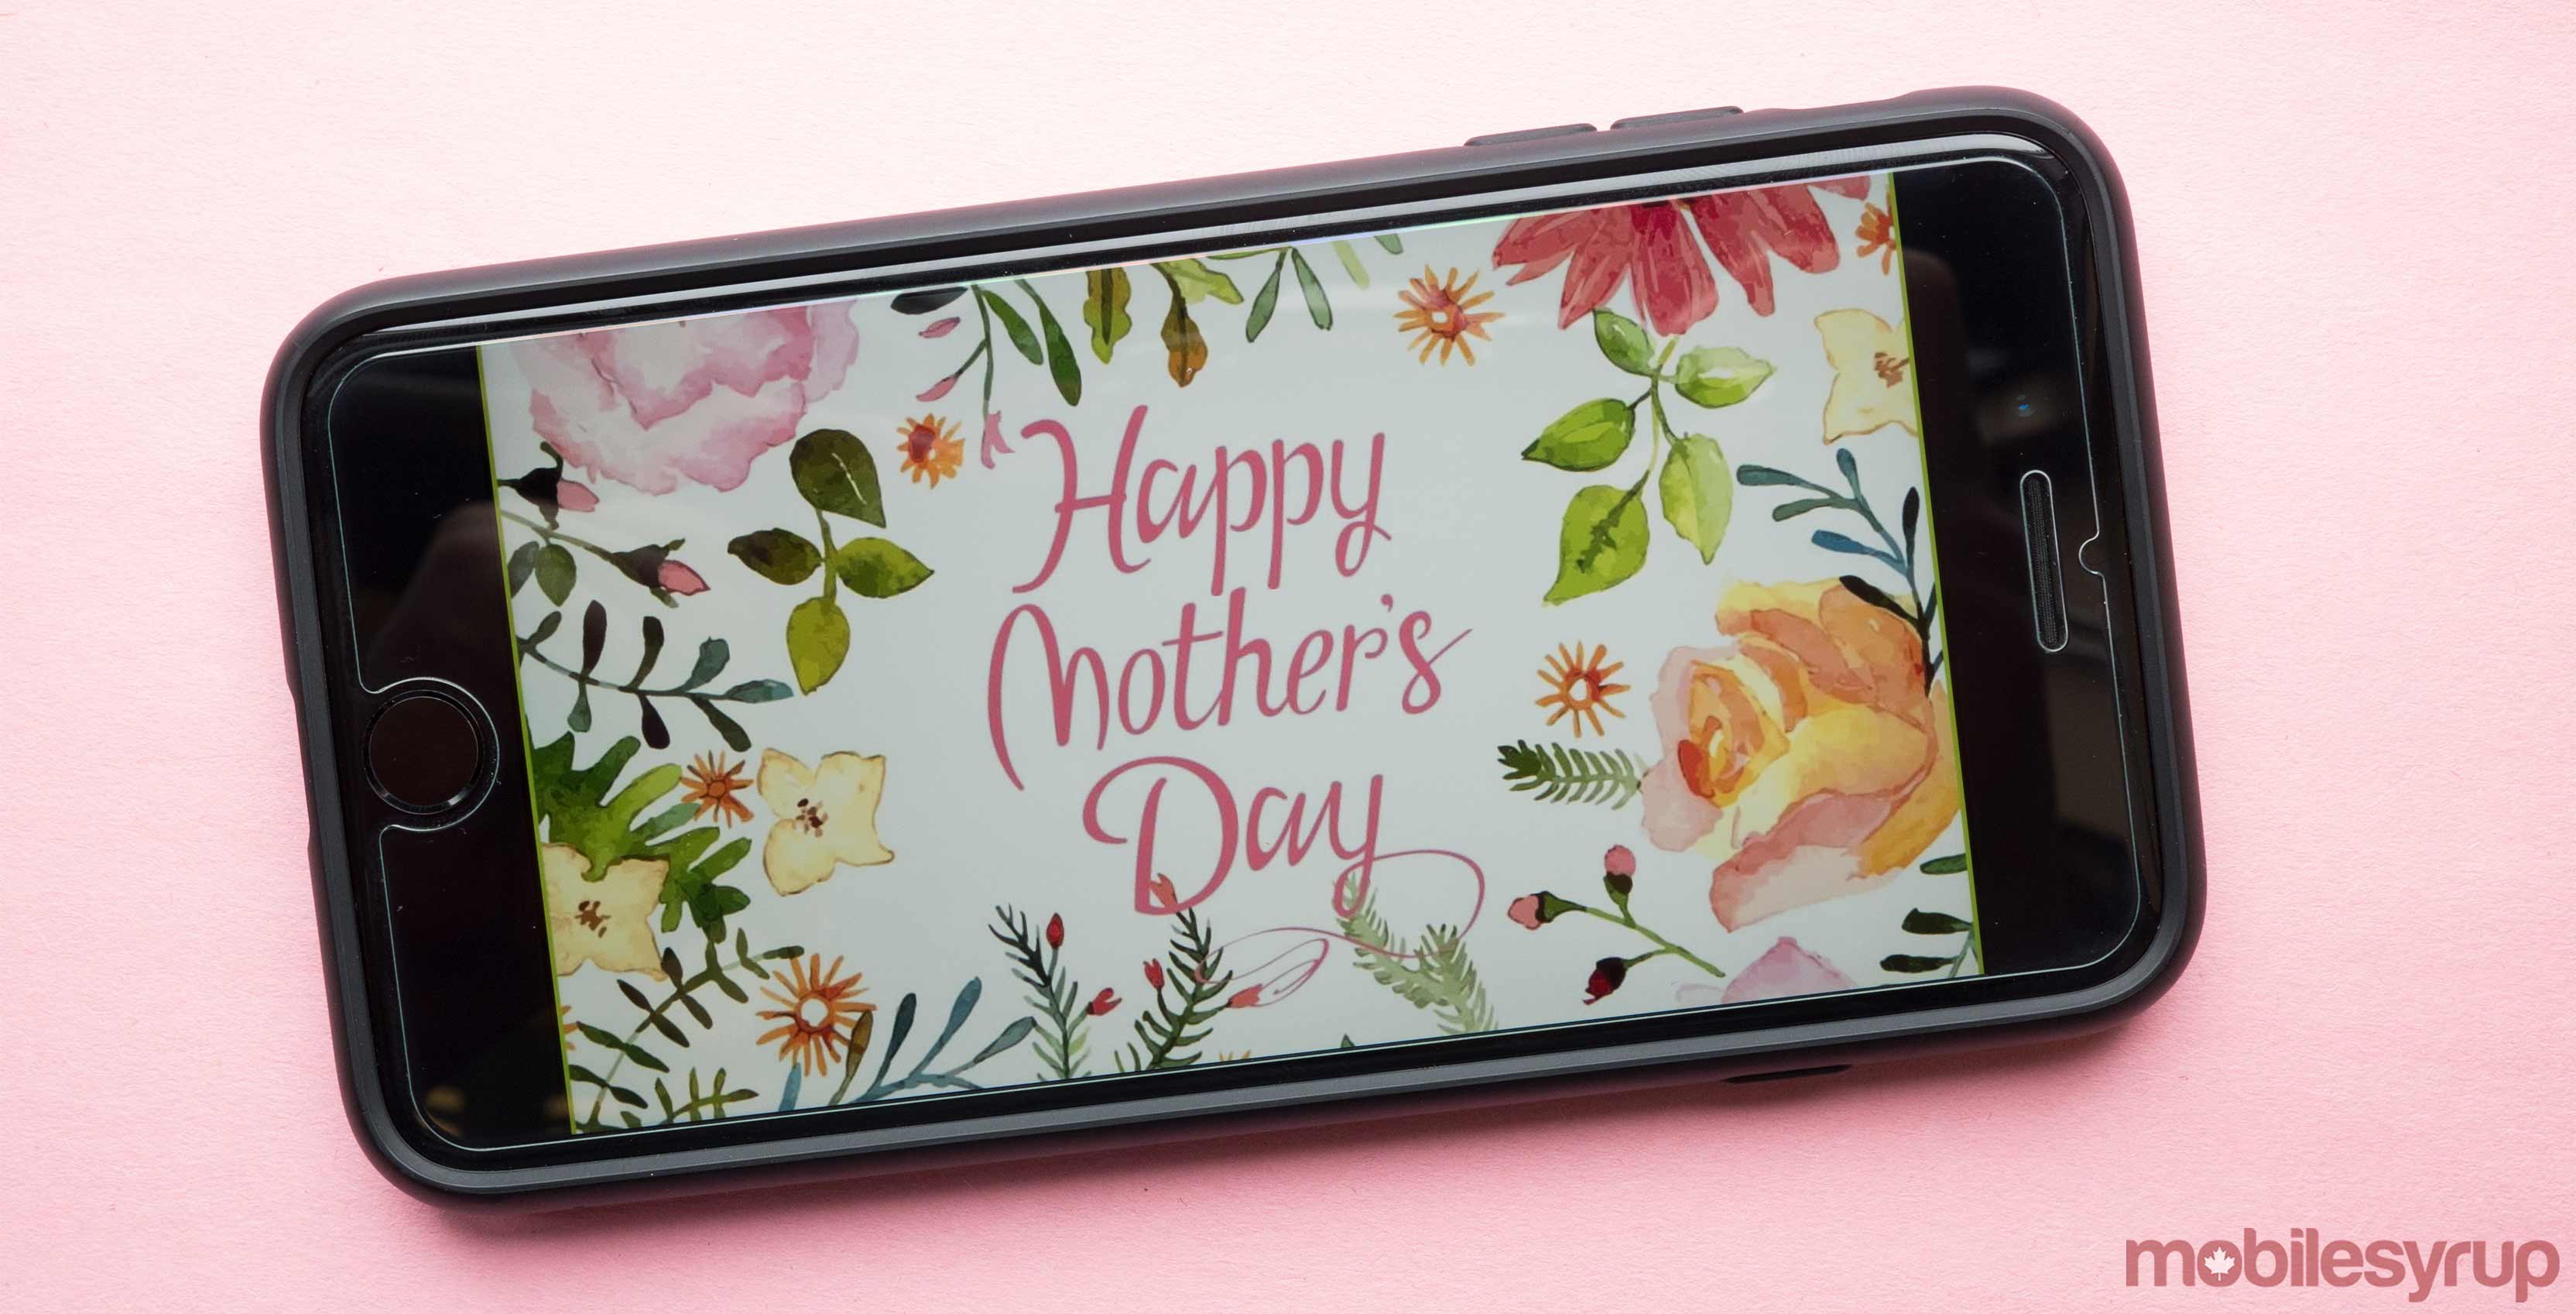 Mother's Day tech gifts